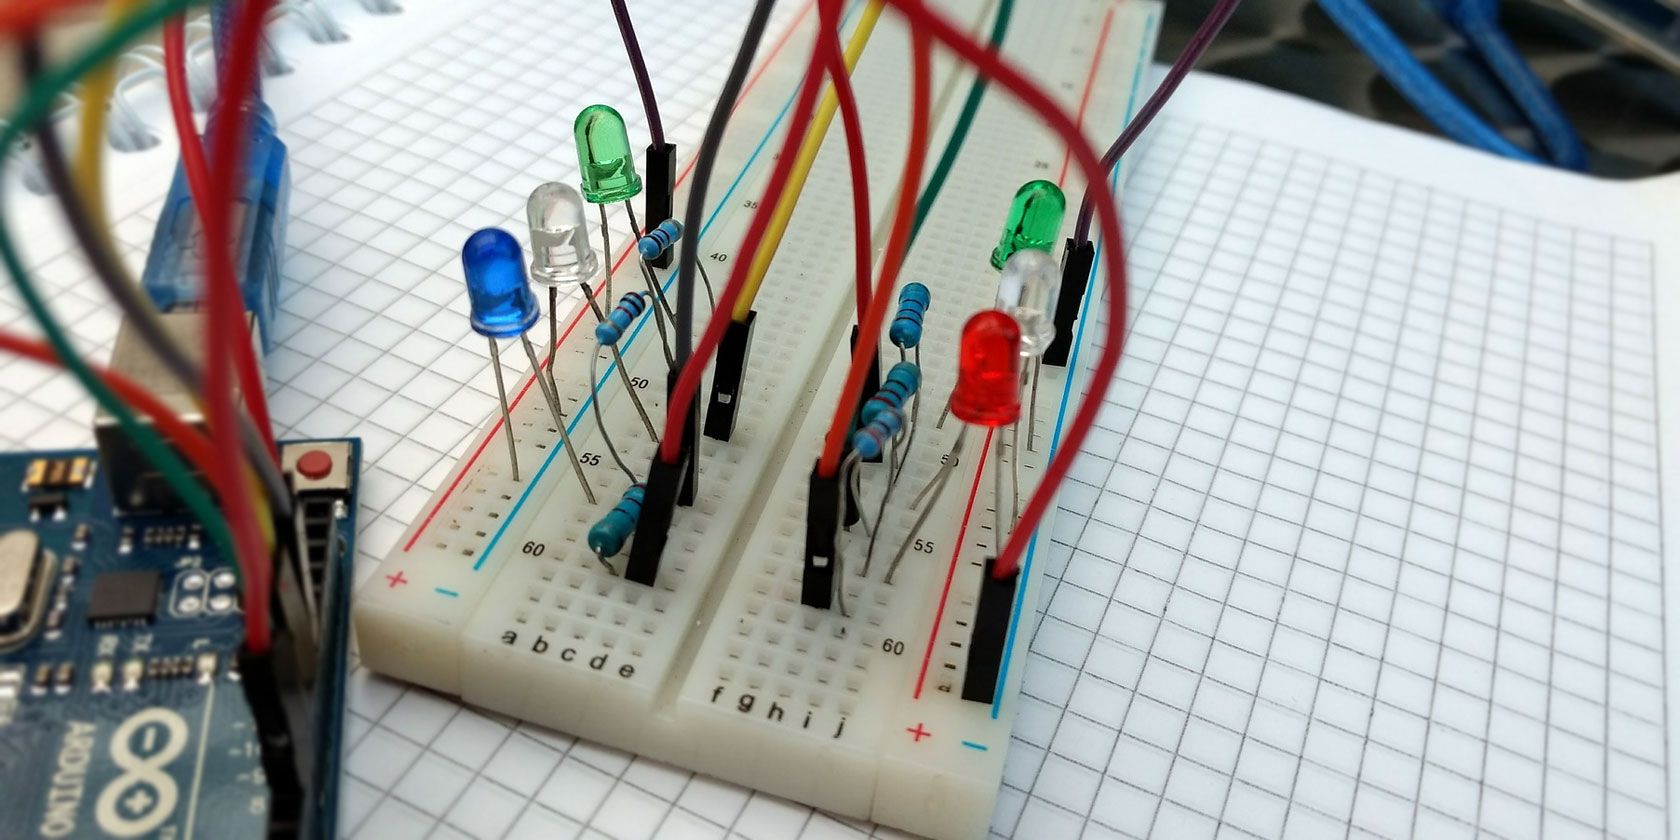 A breadboard with electronic components and wires